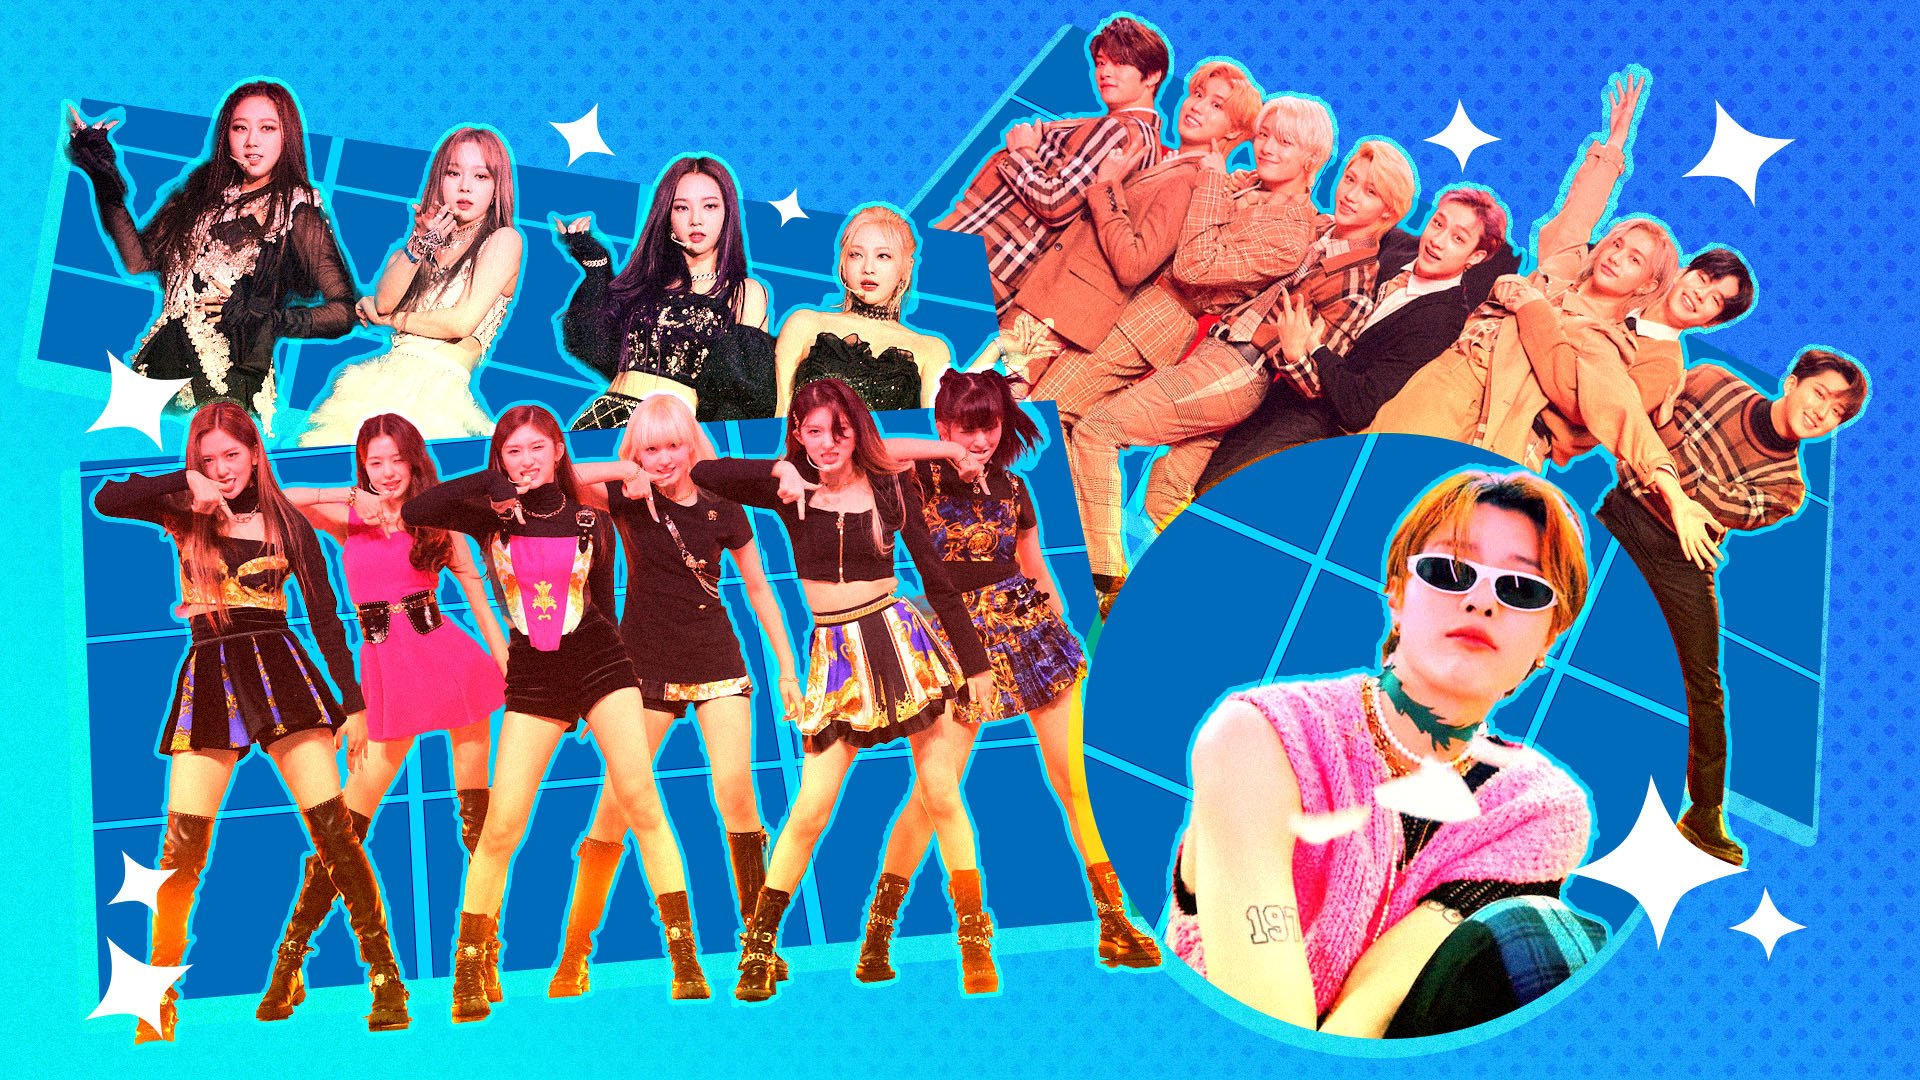 A collage of images of K-pop stars